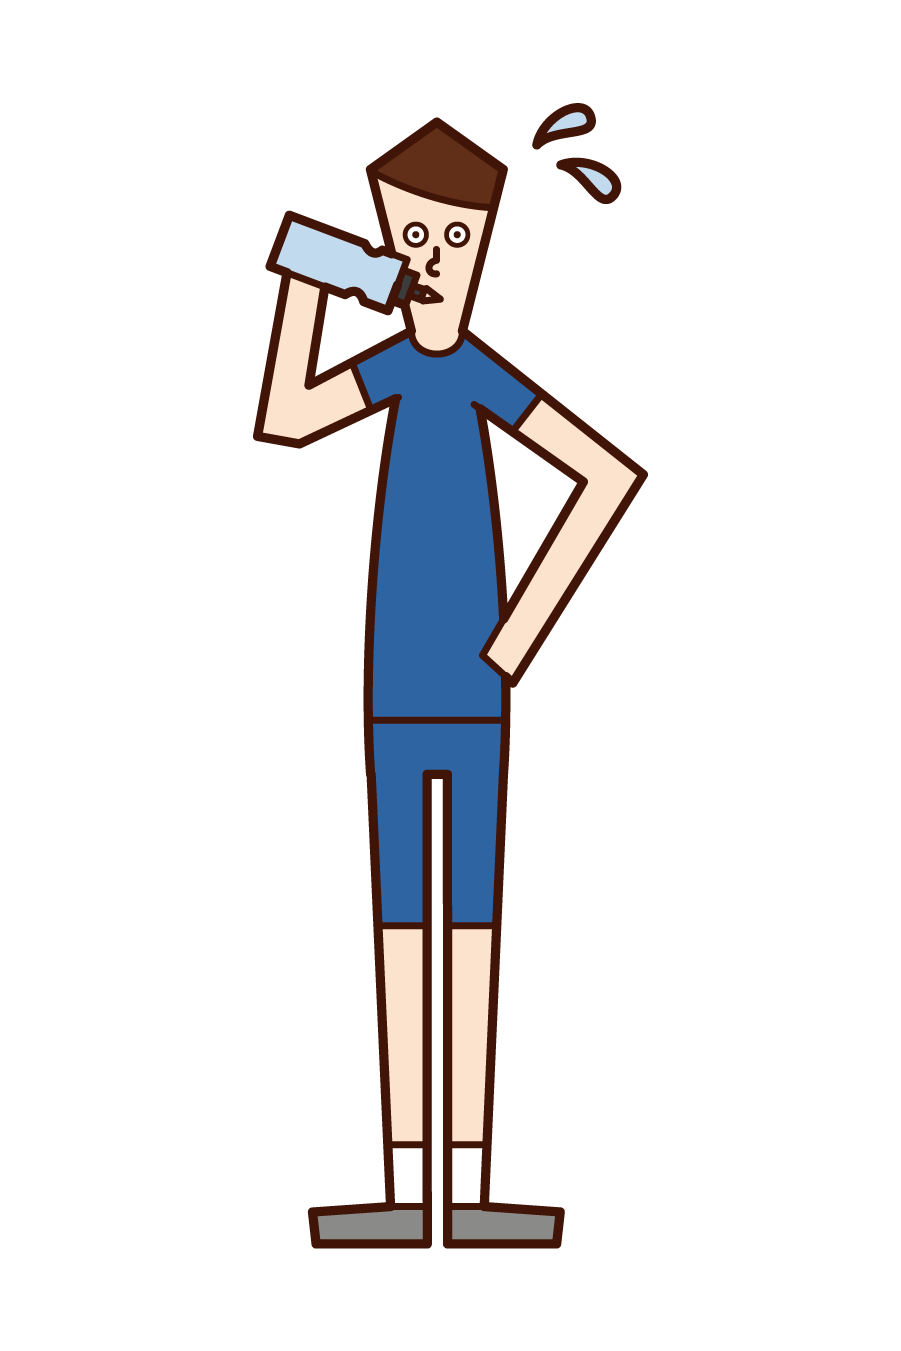 Illustration of a person (man) who rehydrates